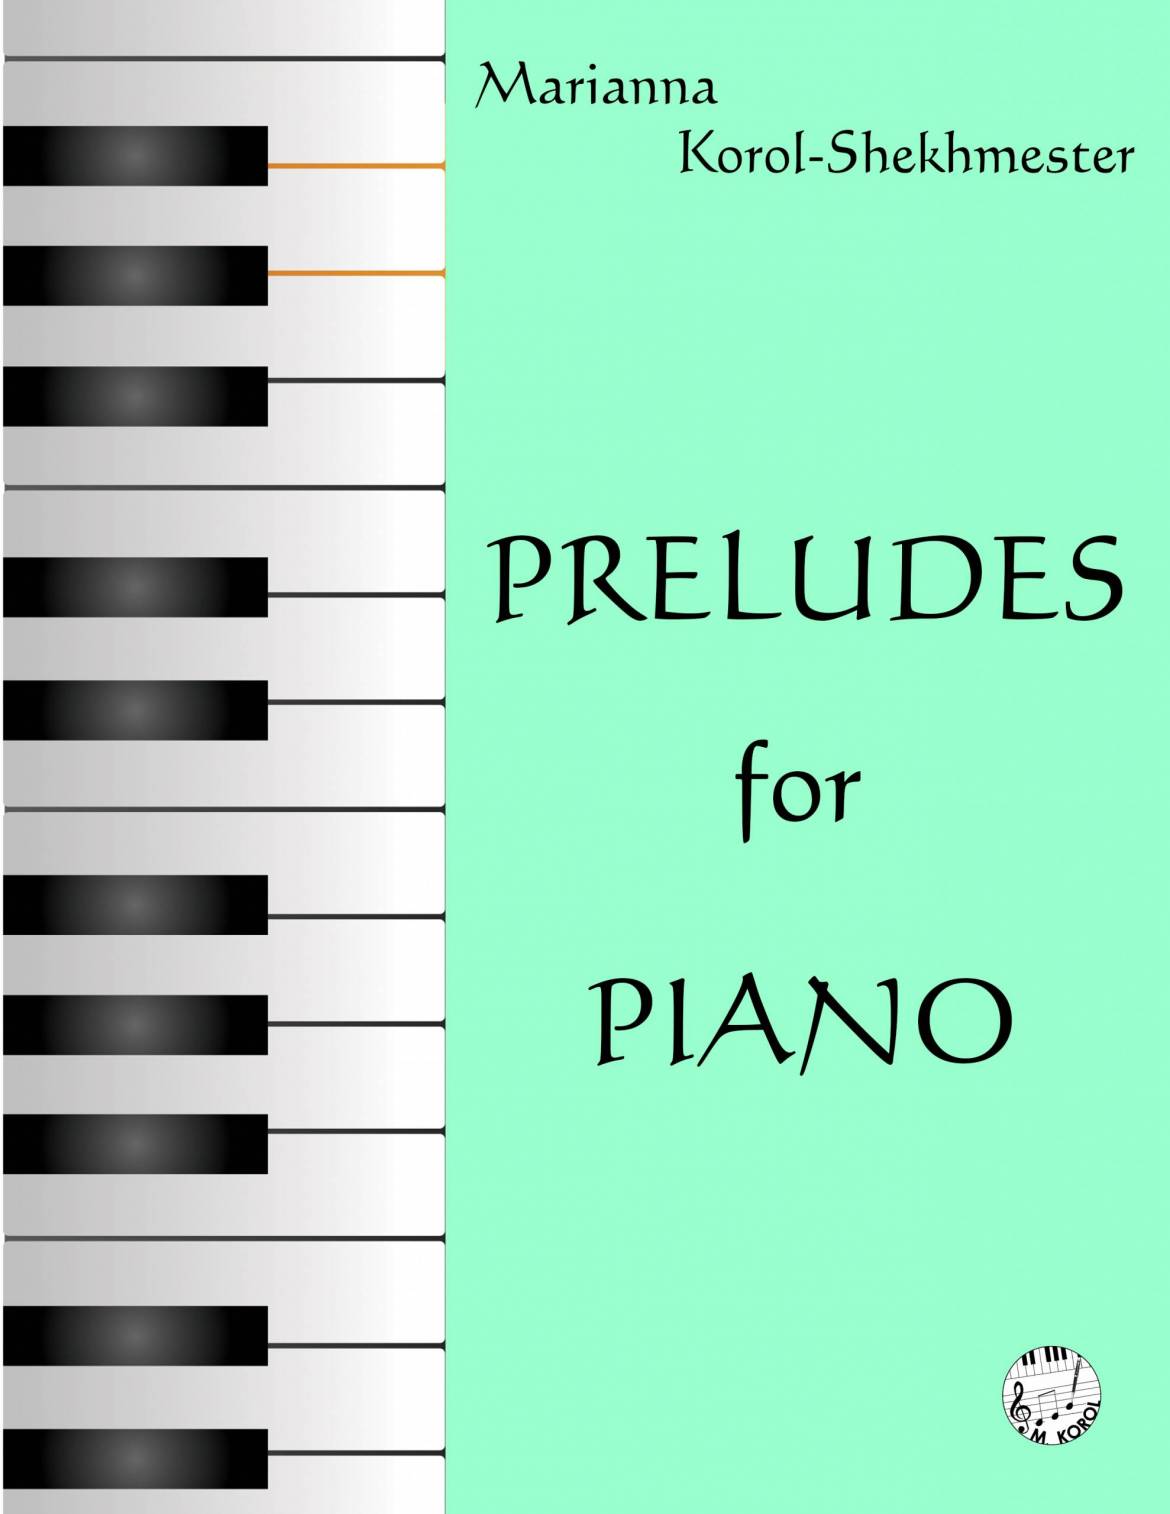 PRELUDES-FOR-PIANO-scaled.jpg